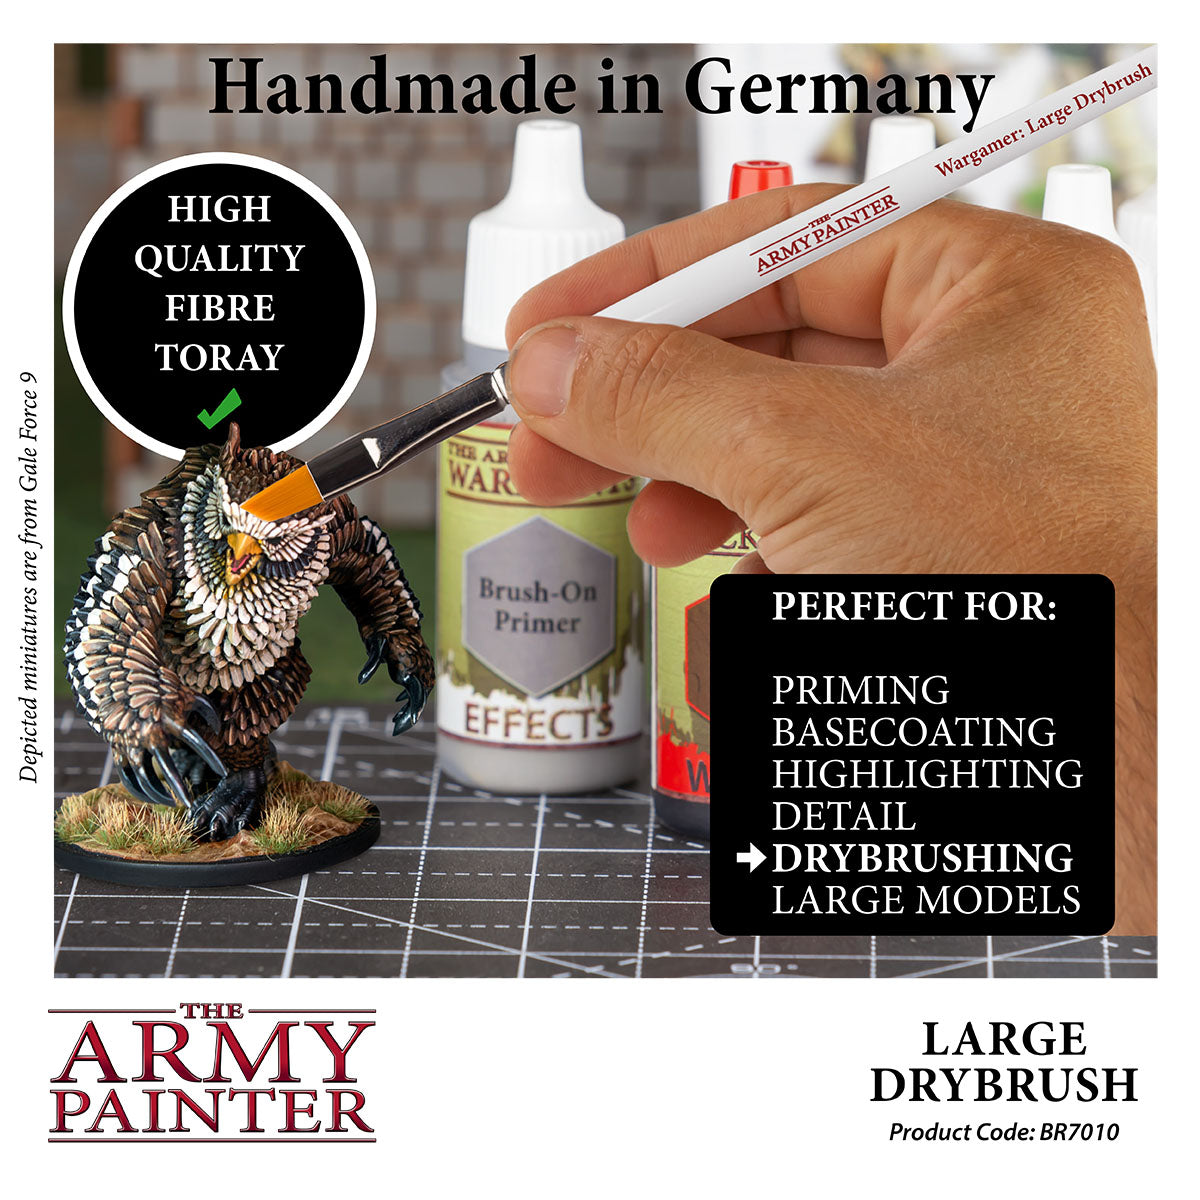 First Impressions of The Army Painter Masterclass Drybrush Set